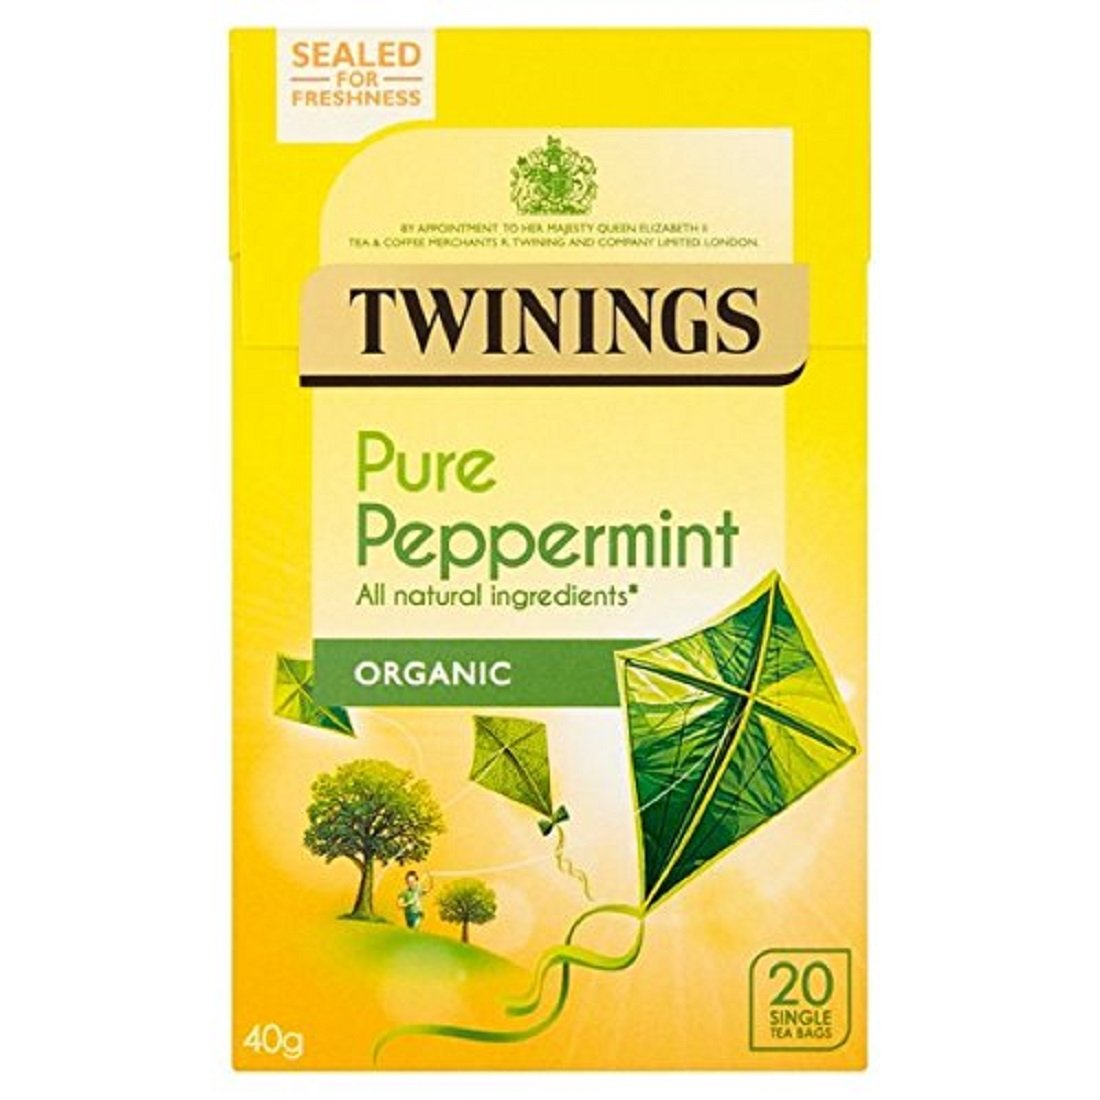 Twinings Pure Peppermint 20 Teabags (40g) Twinings